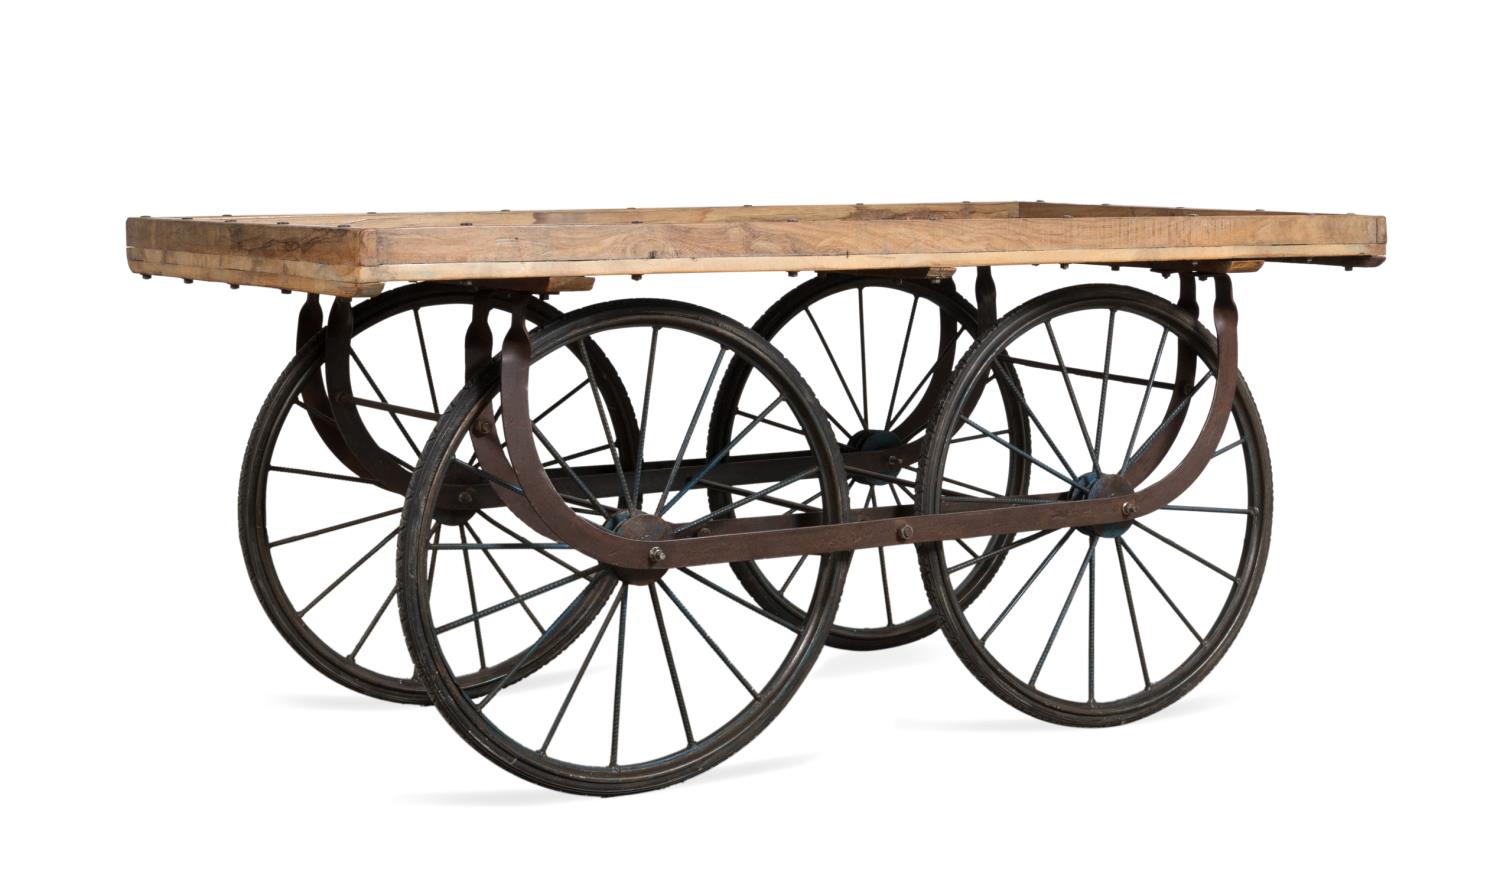 LARGE WOODEN TROLLEY OR INDUSTRIAL 2f9680